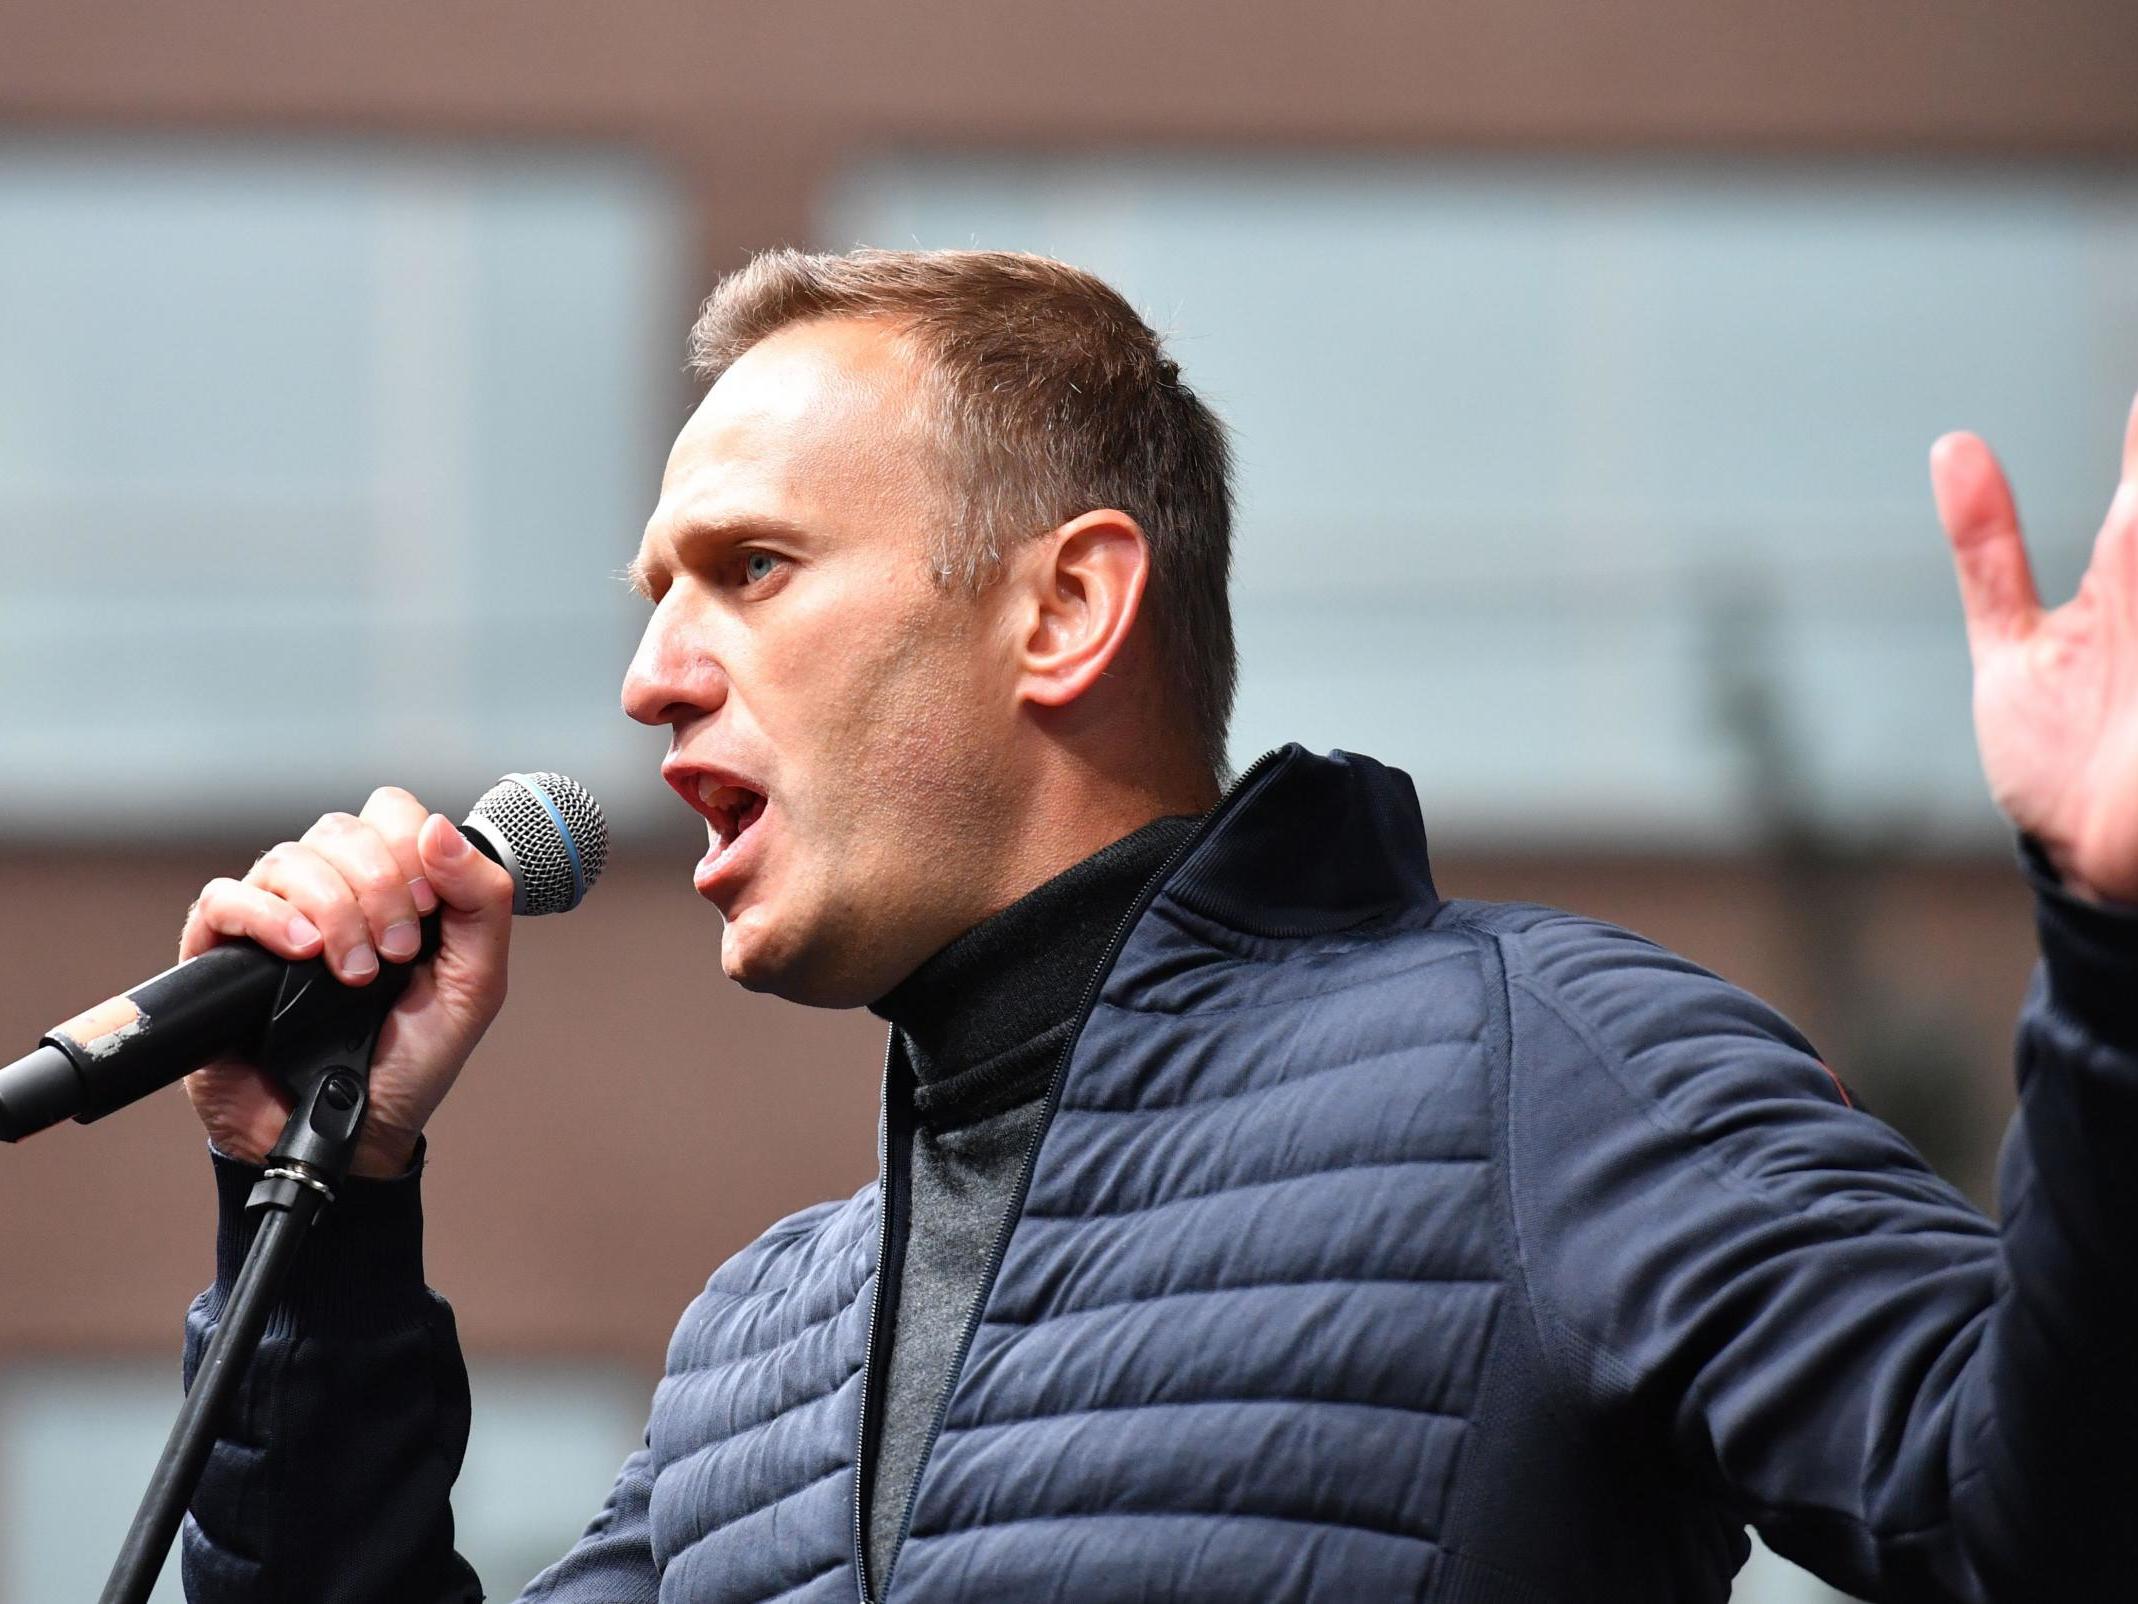 Russian opposition leader Alexei Navalny pictured giving a speech in Moscow on 29 September, 2019.